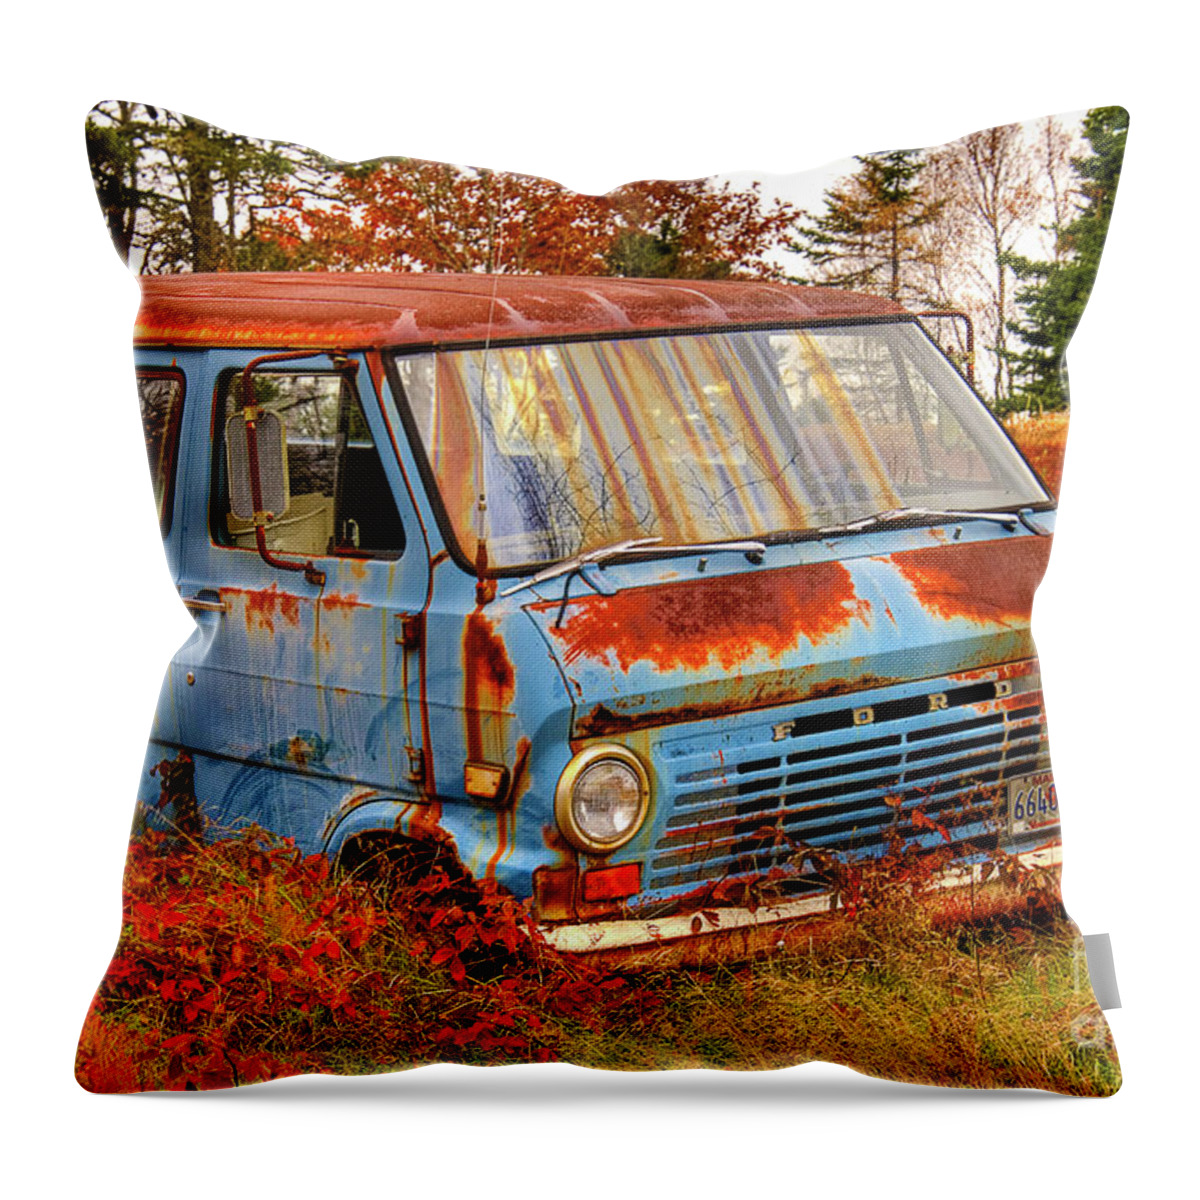 Ford Throw Pillow featuring the photograph Ford Van by Alana Ranney